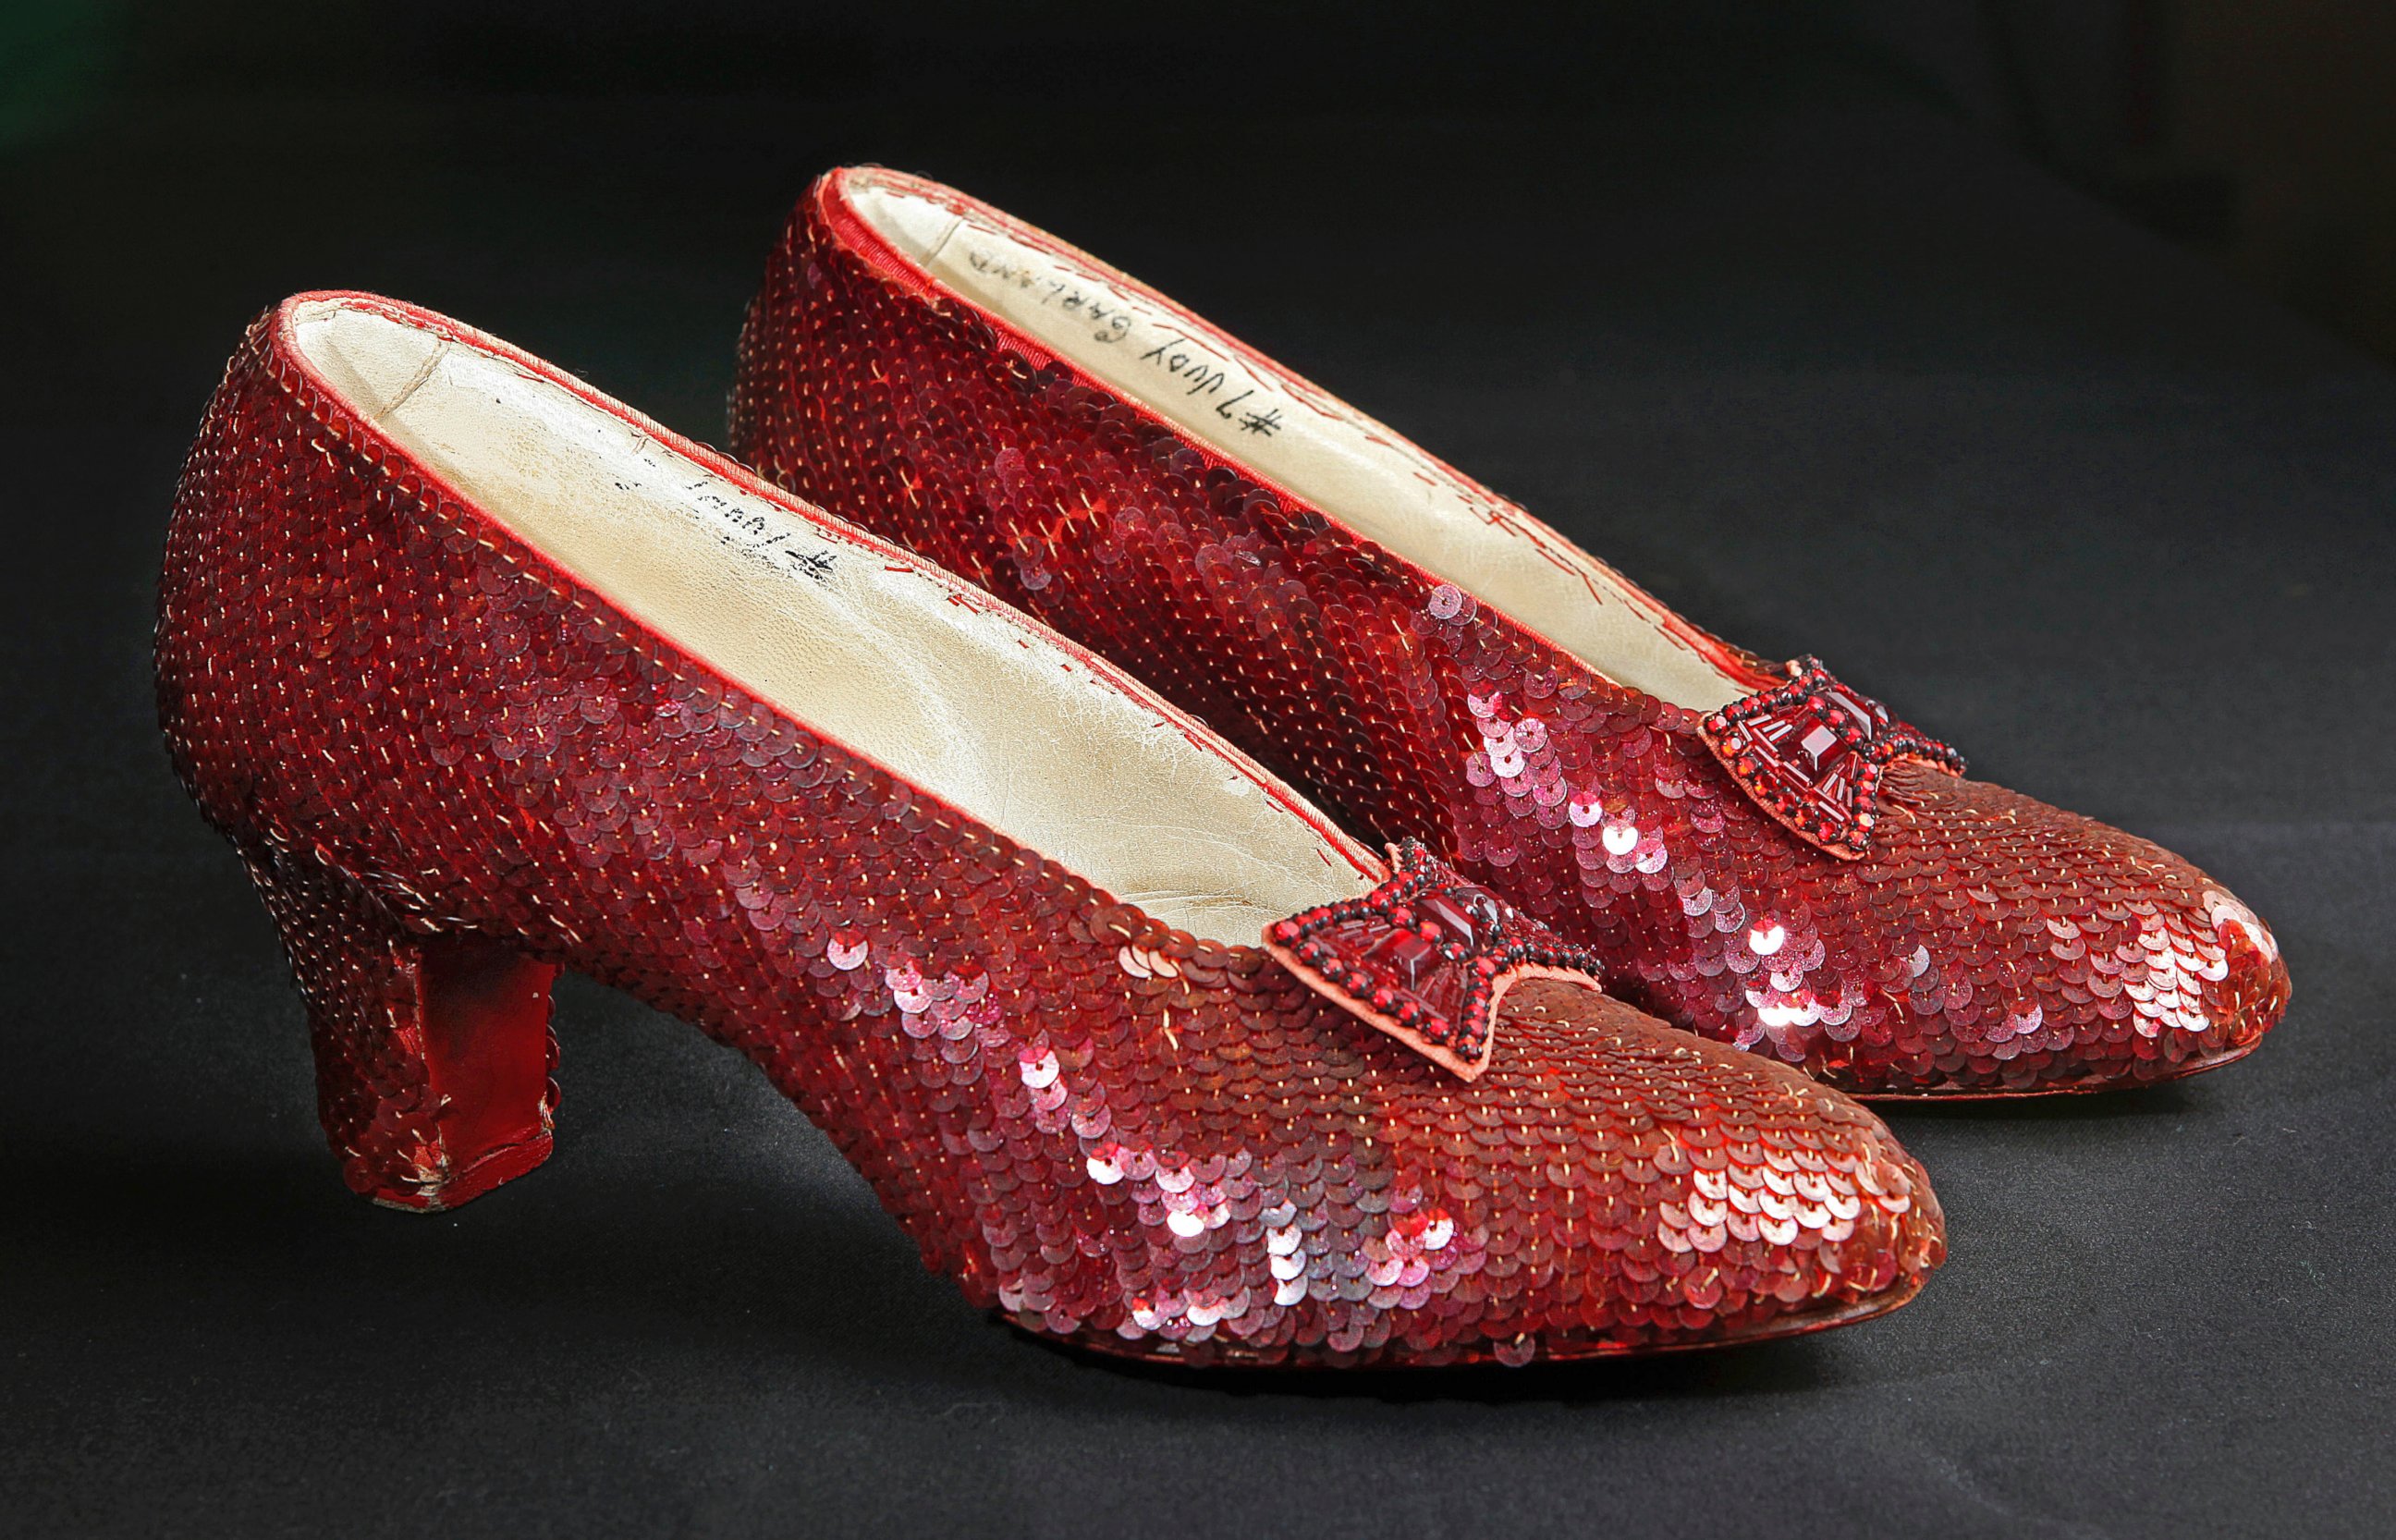 PHOTO: The sequin-covered ruby slippers worn by Judy Garland in "The Wizard of Oz" are pictured at the offices of Profiles in History in Calabasas, Calif., Nov. 9, 2001.